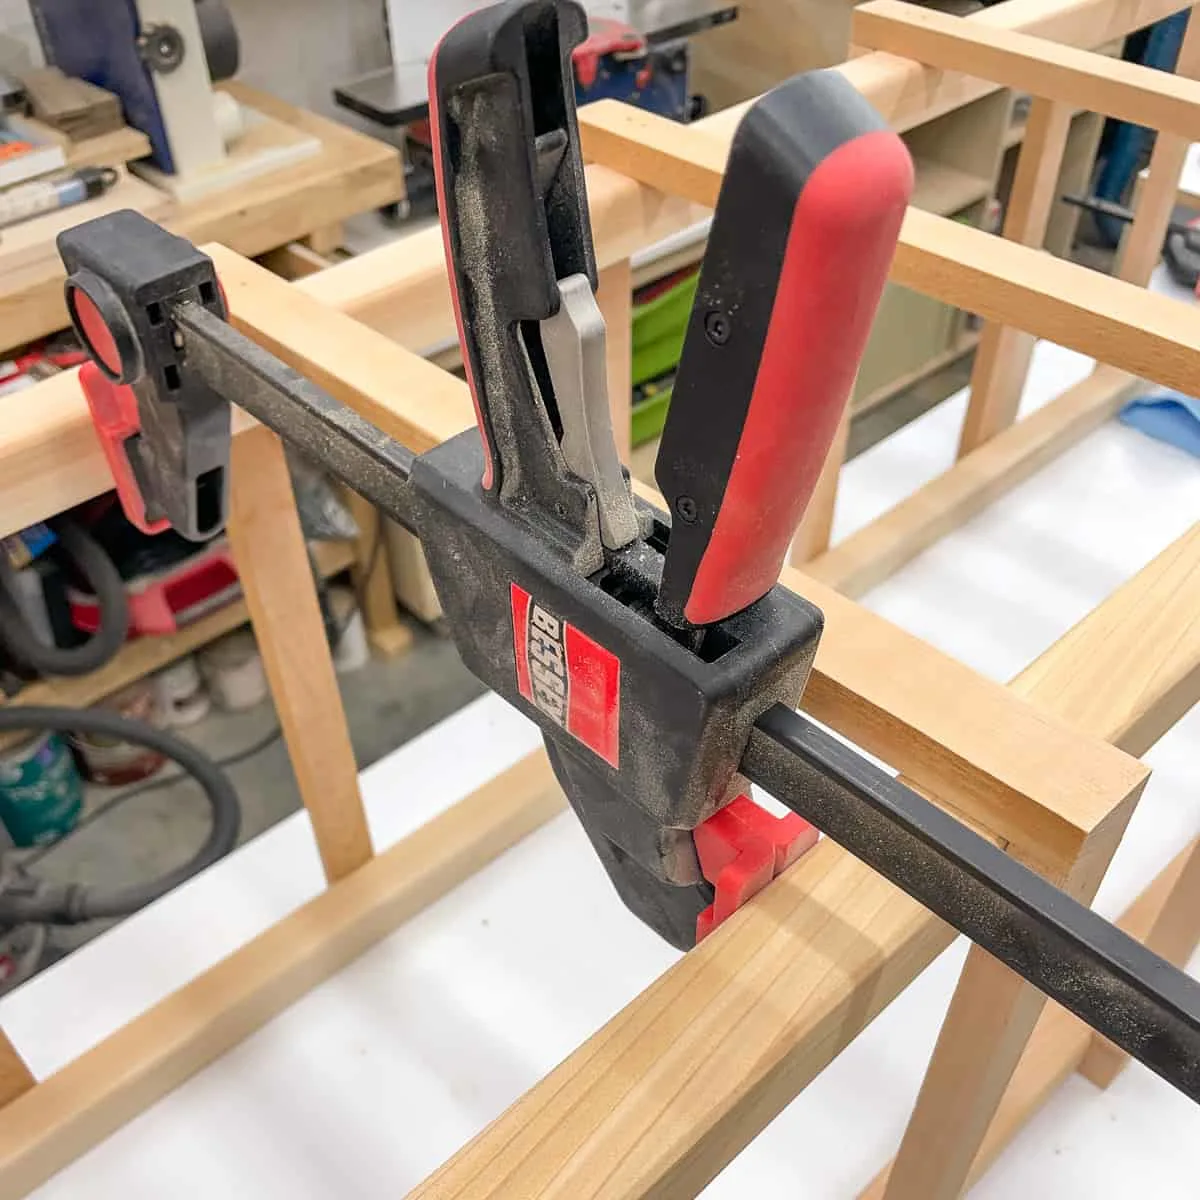 Bessey quick clamps acting as a spreader to align the slats of the wood tomato cage